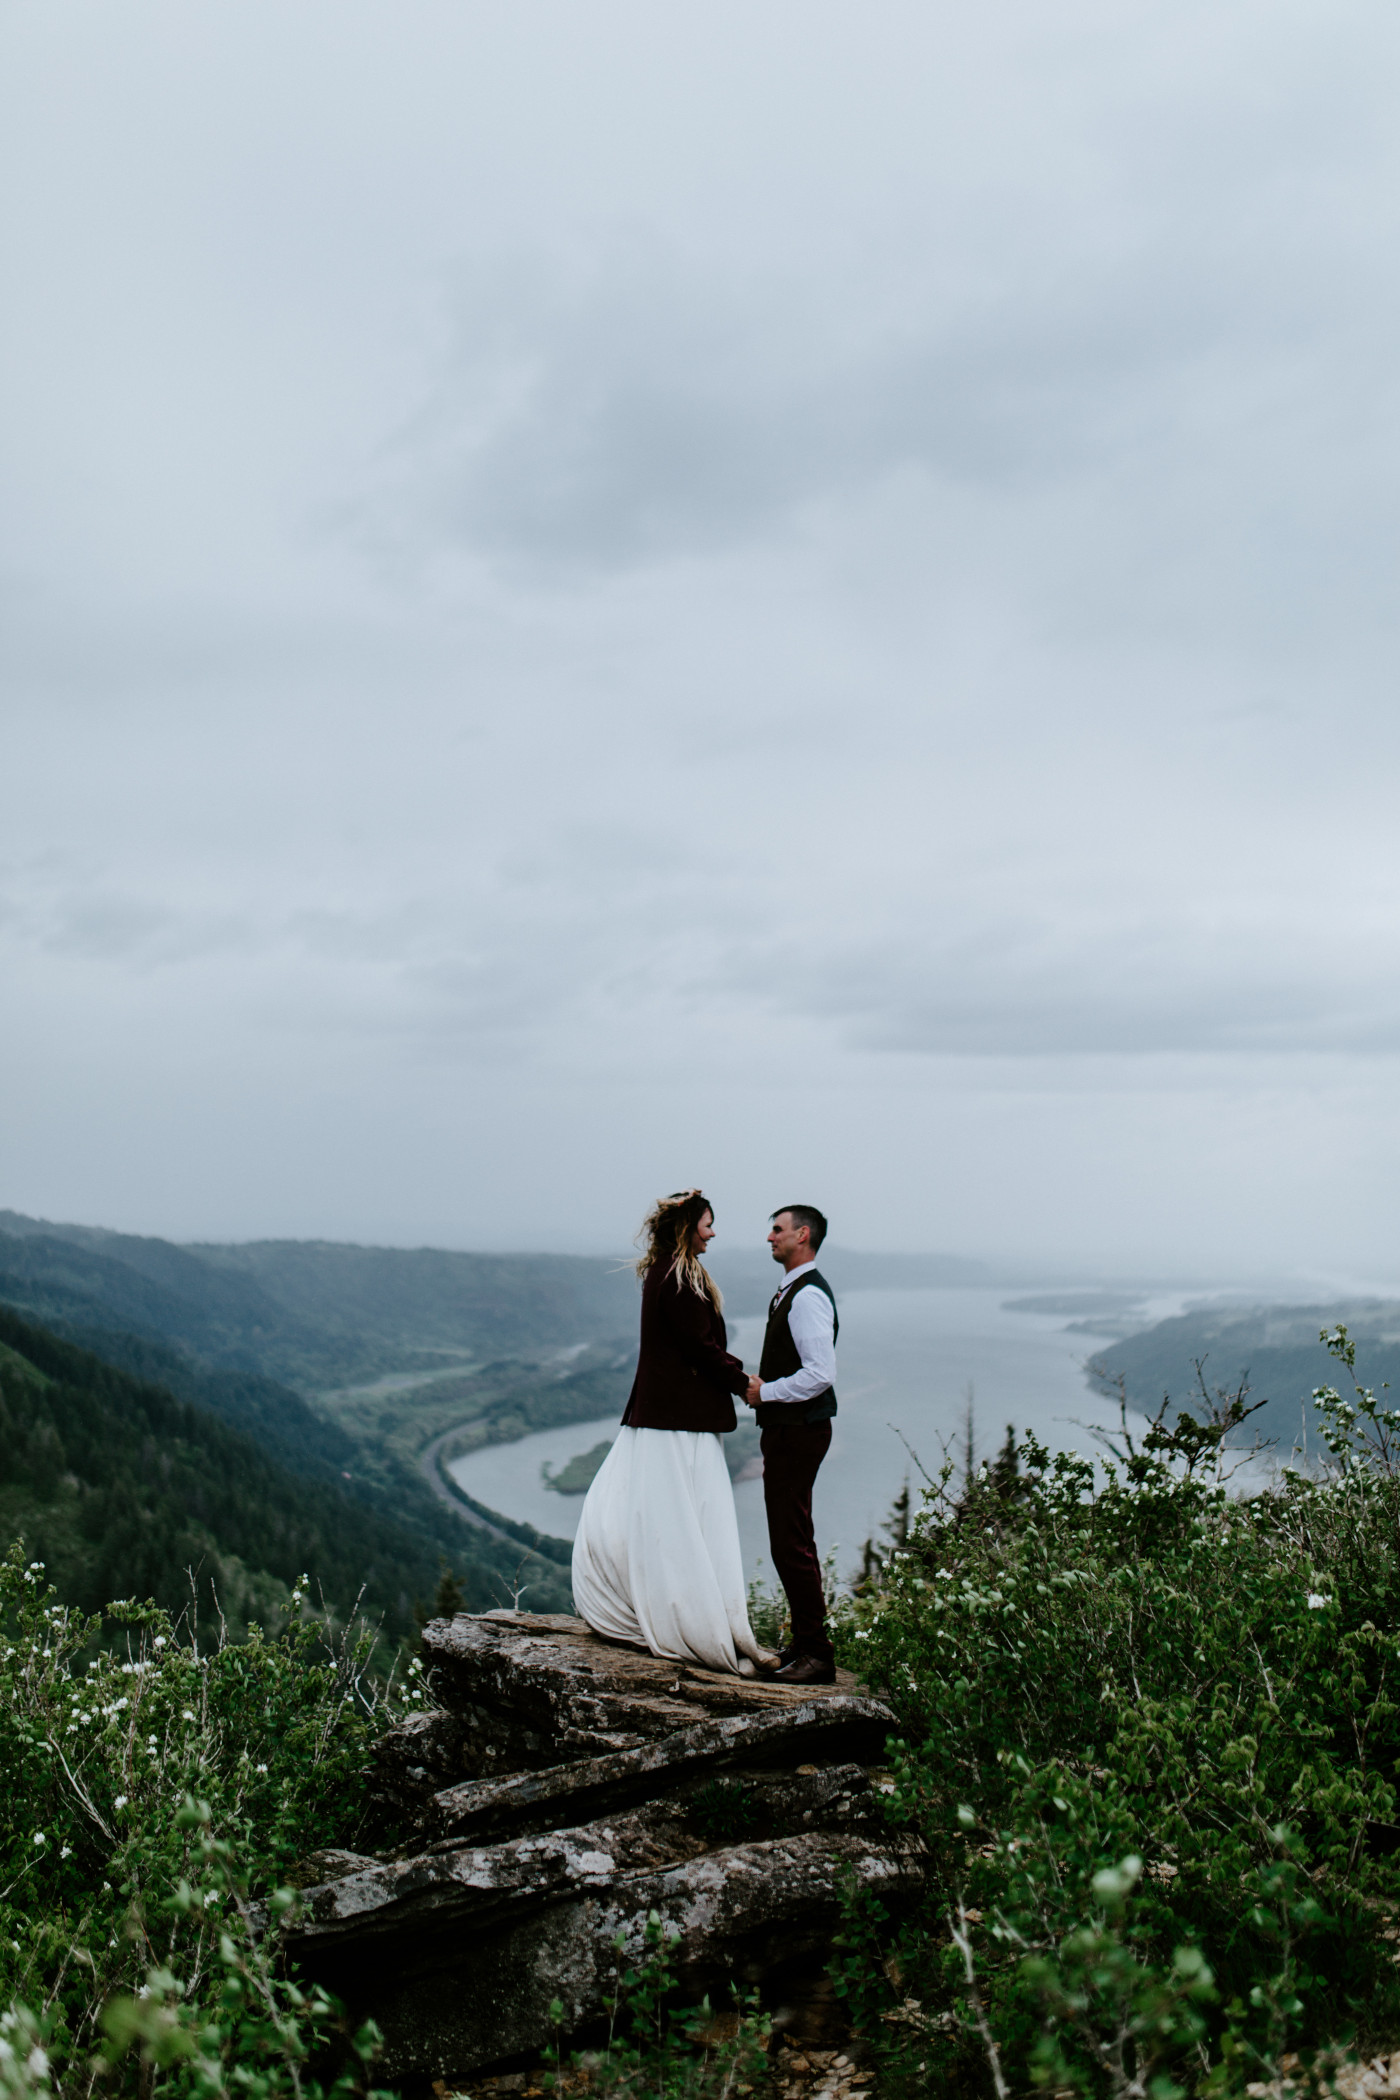 Jordan and Andrew stand holding hands with the Columbia River in the background.